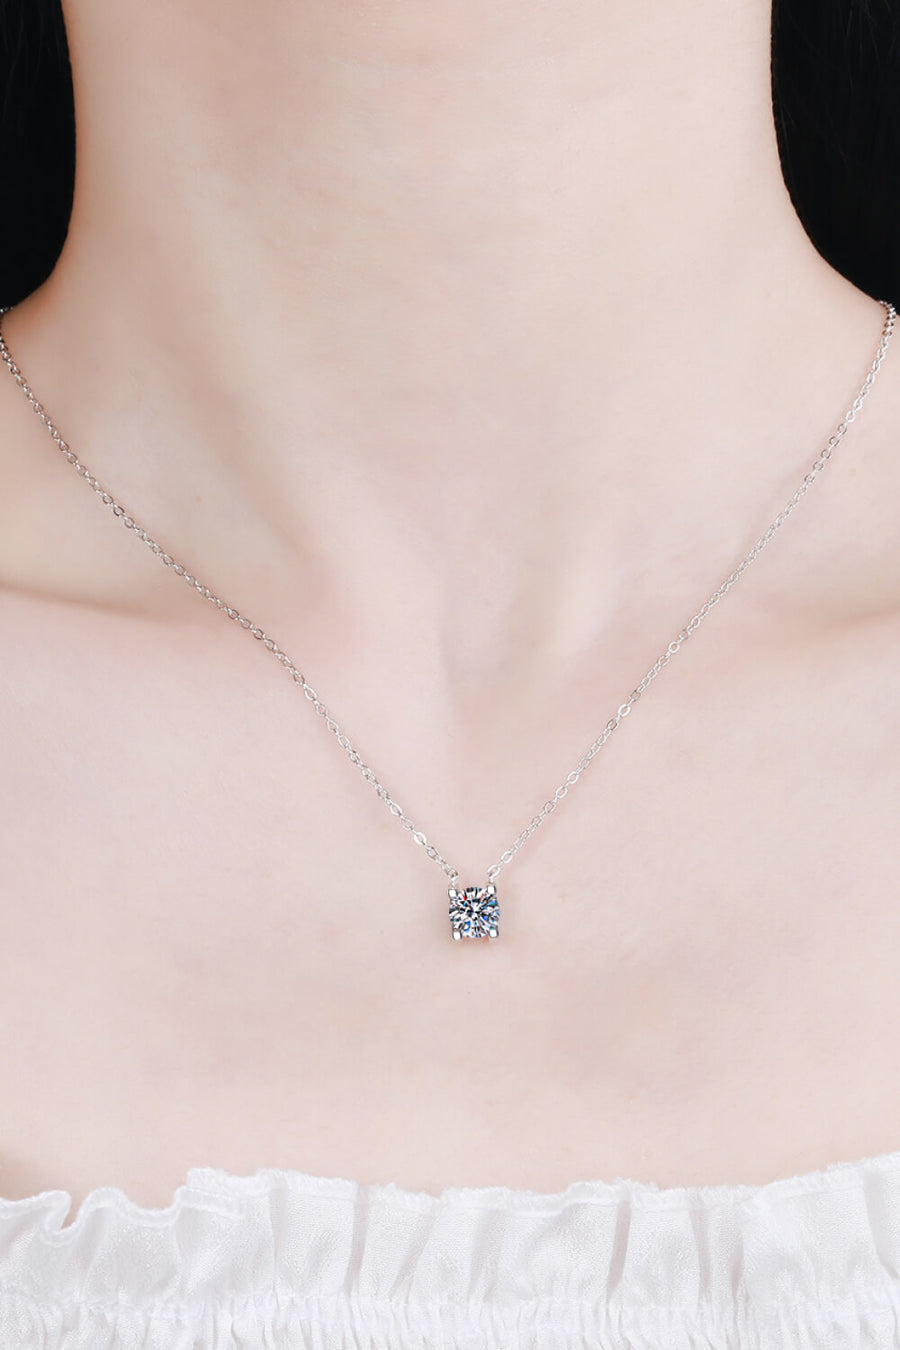 Best Moissanite Necklace Jewelry Gifts for Women | 1 Carat Round Moissanite Chain Necklace | MASON New York